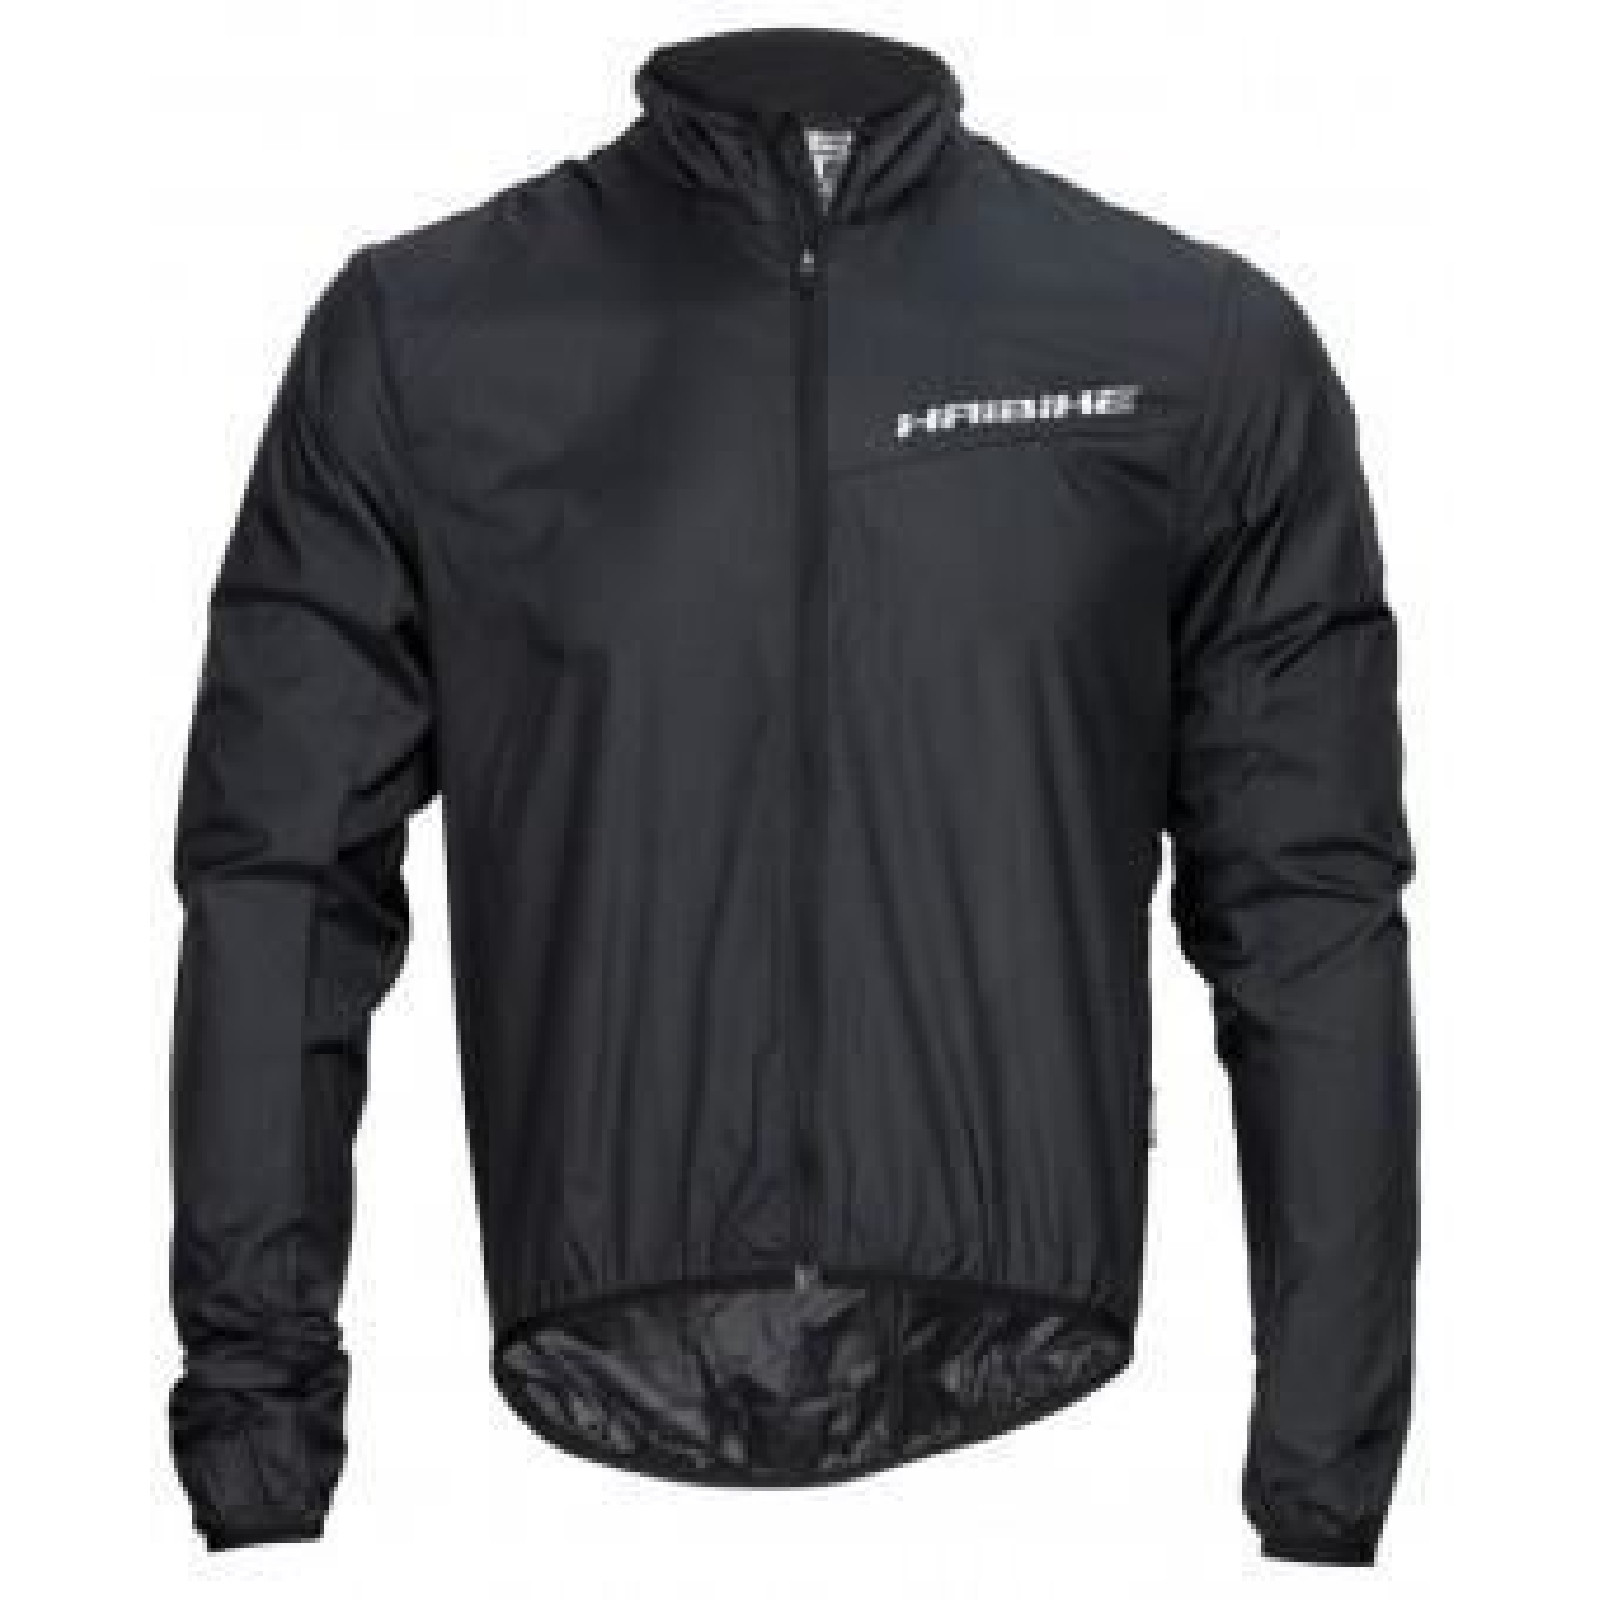 VESTE COUPE-VENT HAIBIKE All Mountain